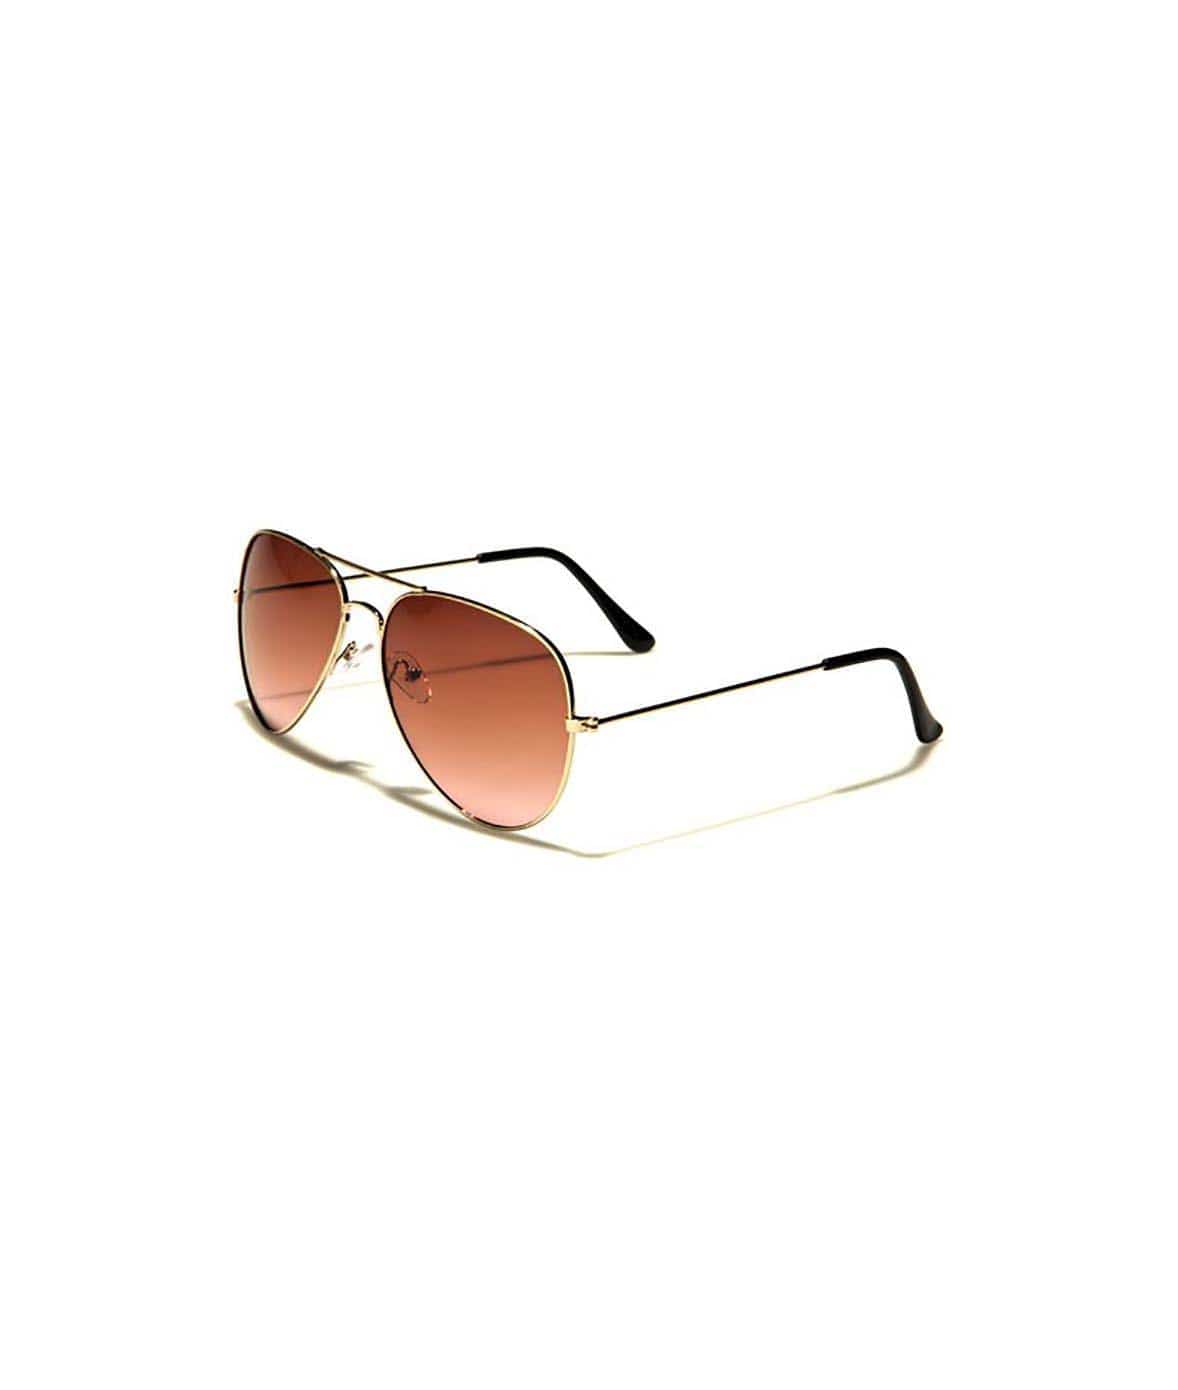 Nayked Apparel Women Women's Gold Aviator Sunglasses, Lifetime Guarantee One-Size / Dark Pink/Gold / NAY-S-W-AF101-GDGC